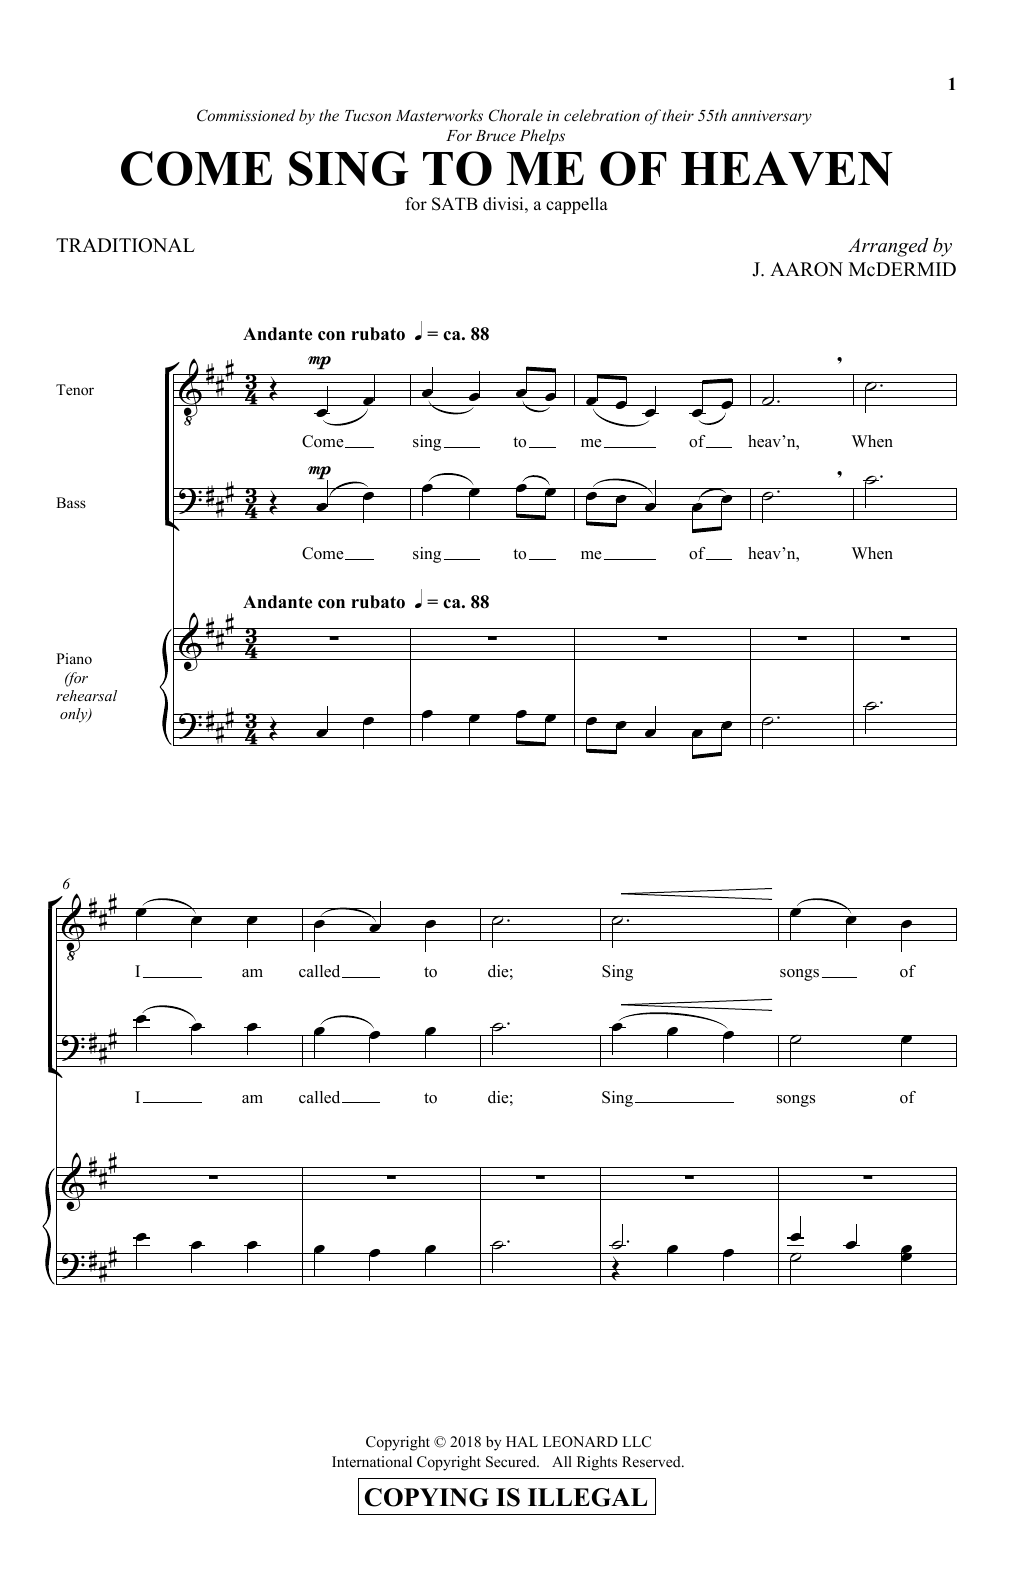 Download J. Aaron McDermid Come Sing To Me Of Heaven Sheet Music